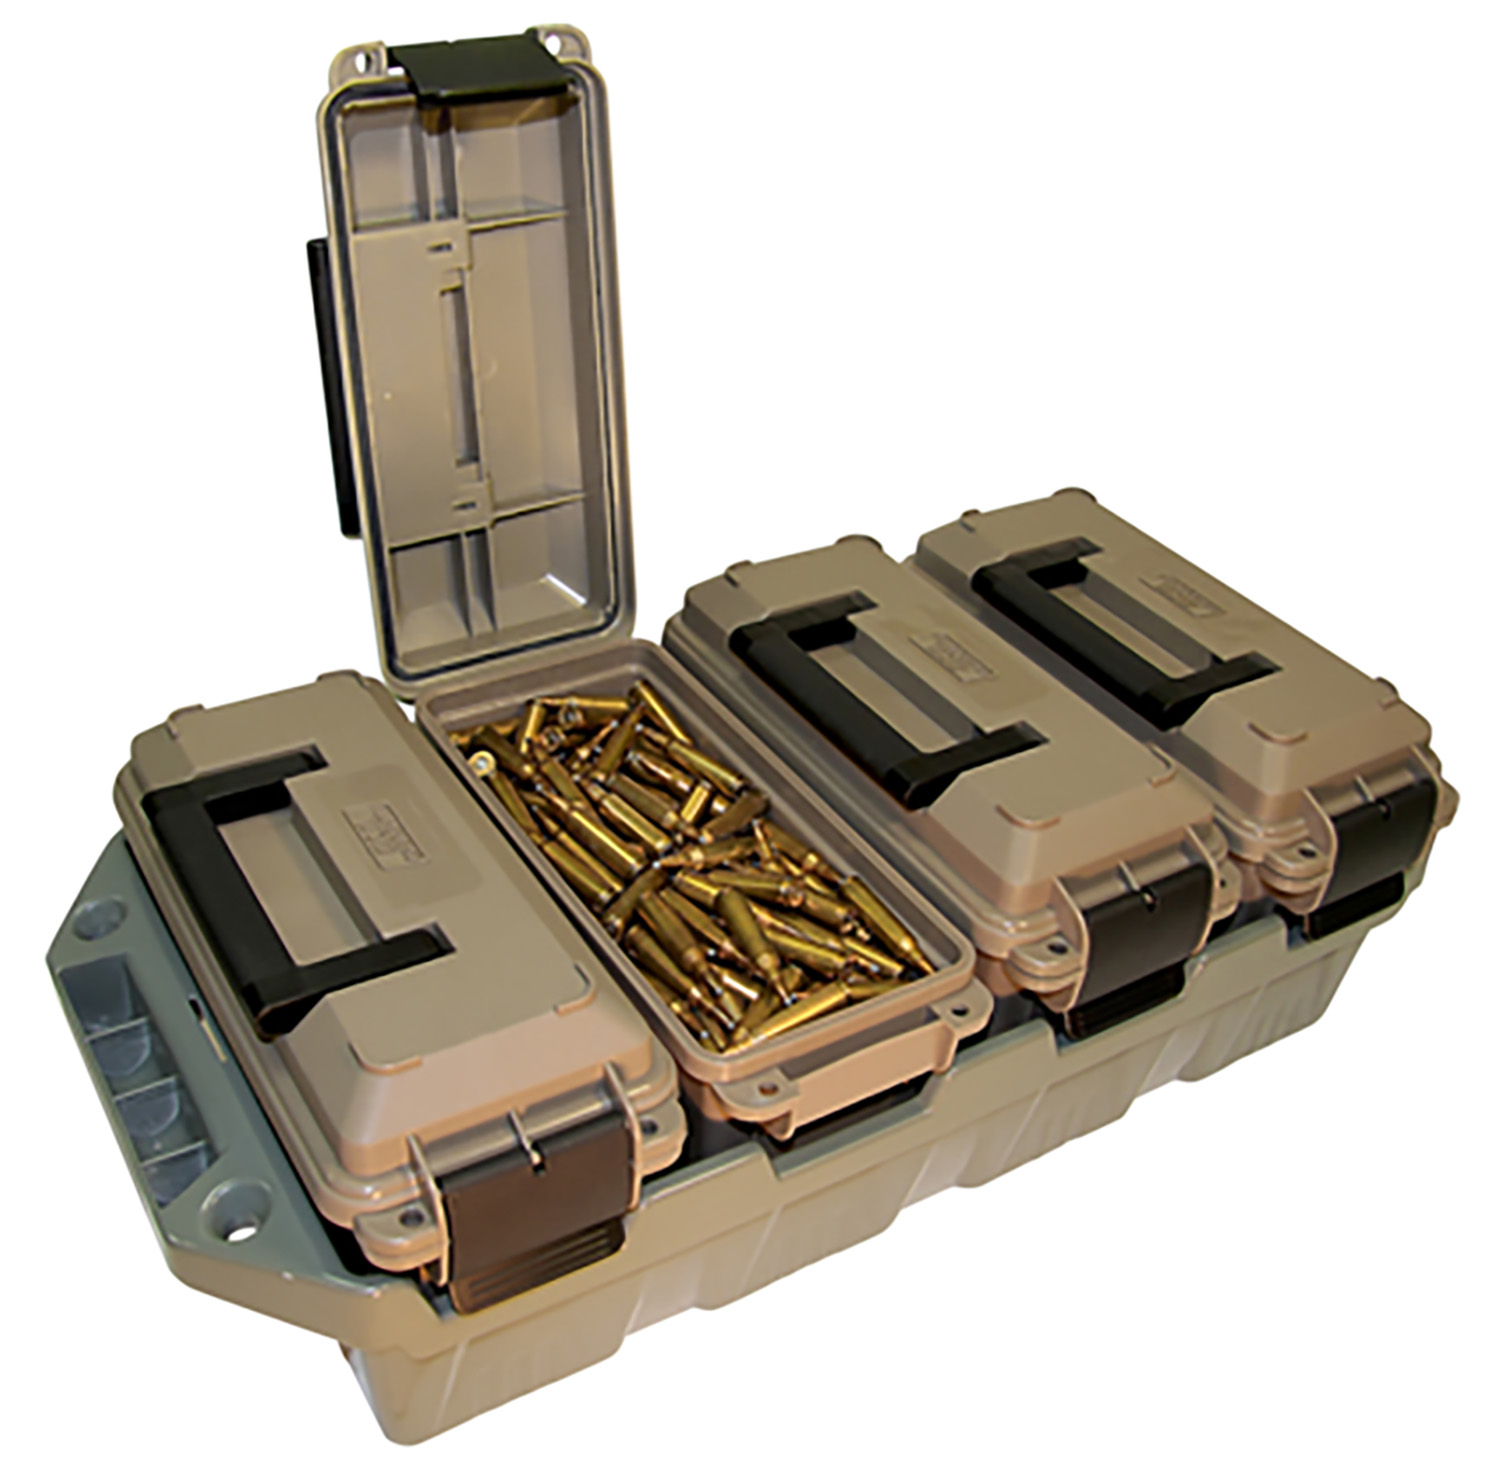 MTM 4-CAN AMMO CRATE W/ 4 .30 CAL AMMO CANS ARMY GRN/DK ERTH